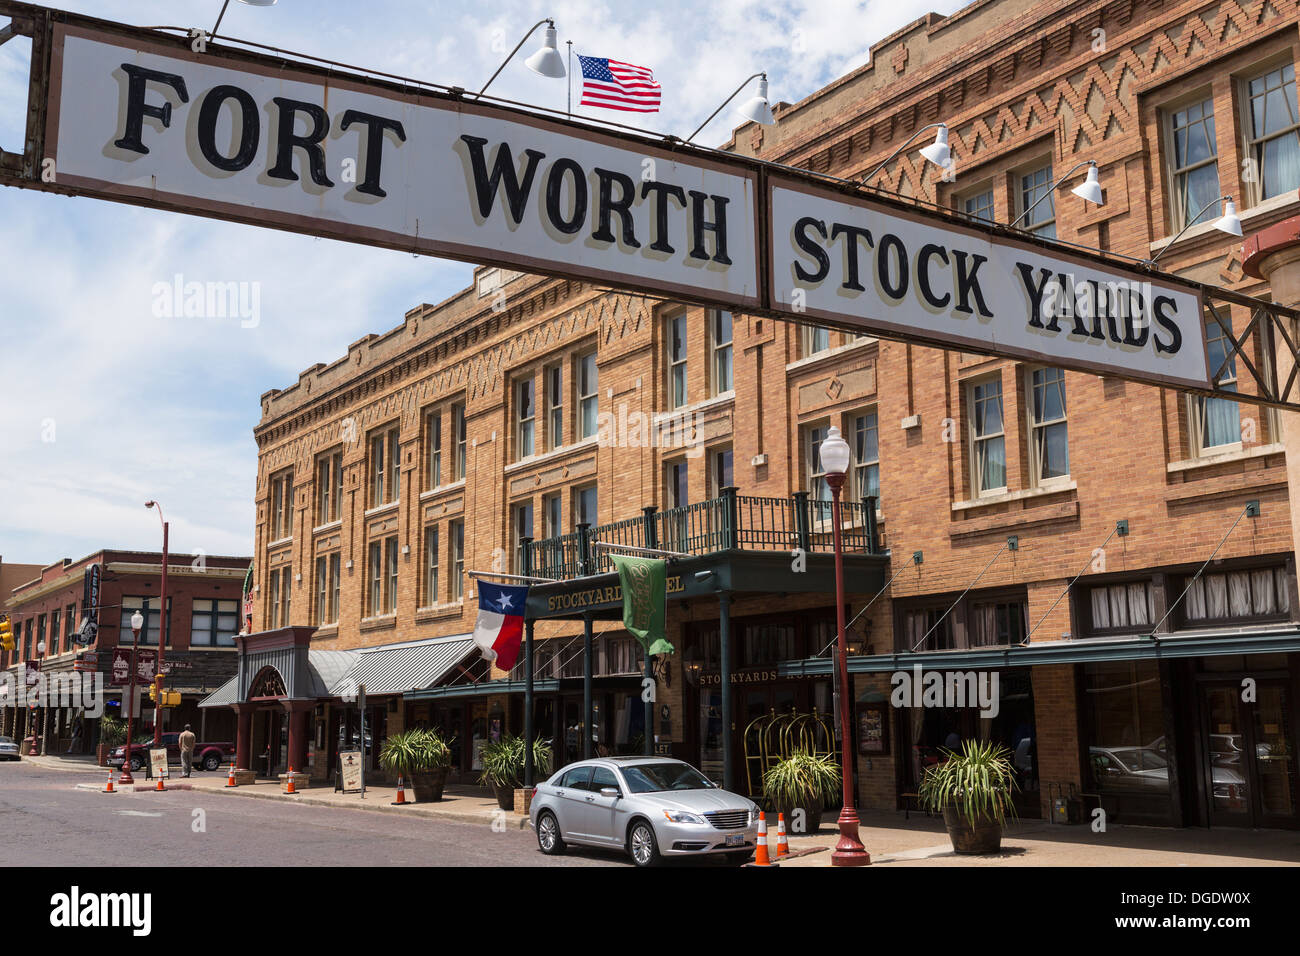 Fort Worth Stock Yards sign Texas USA Stock Photo